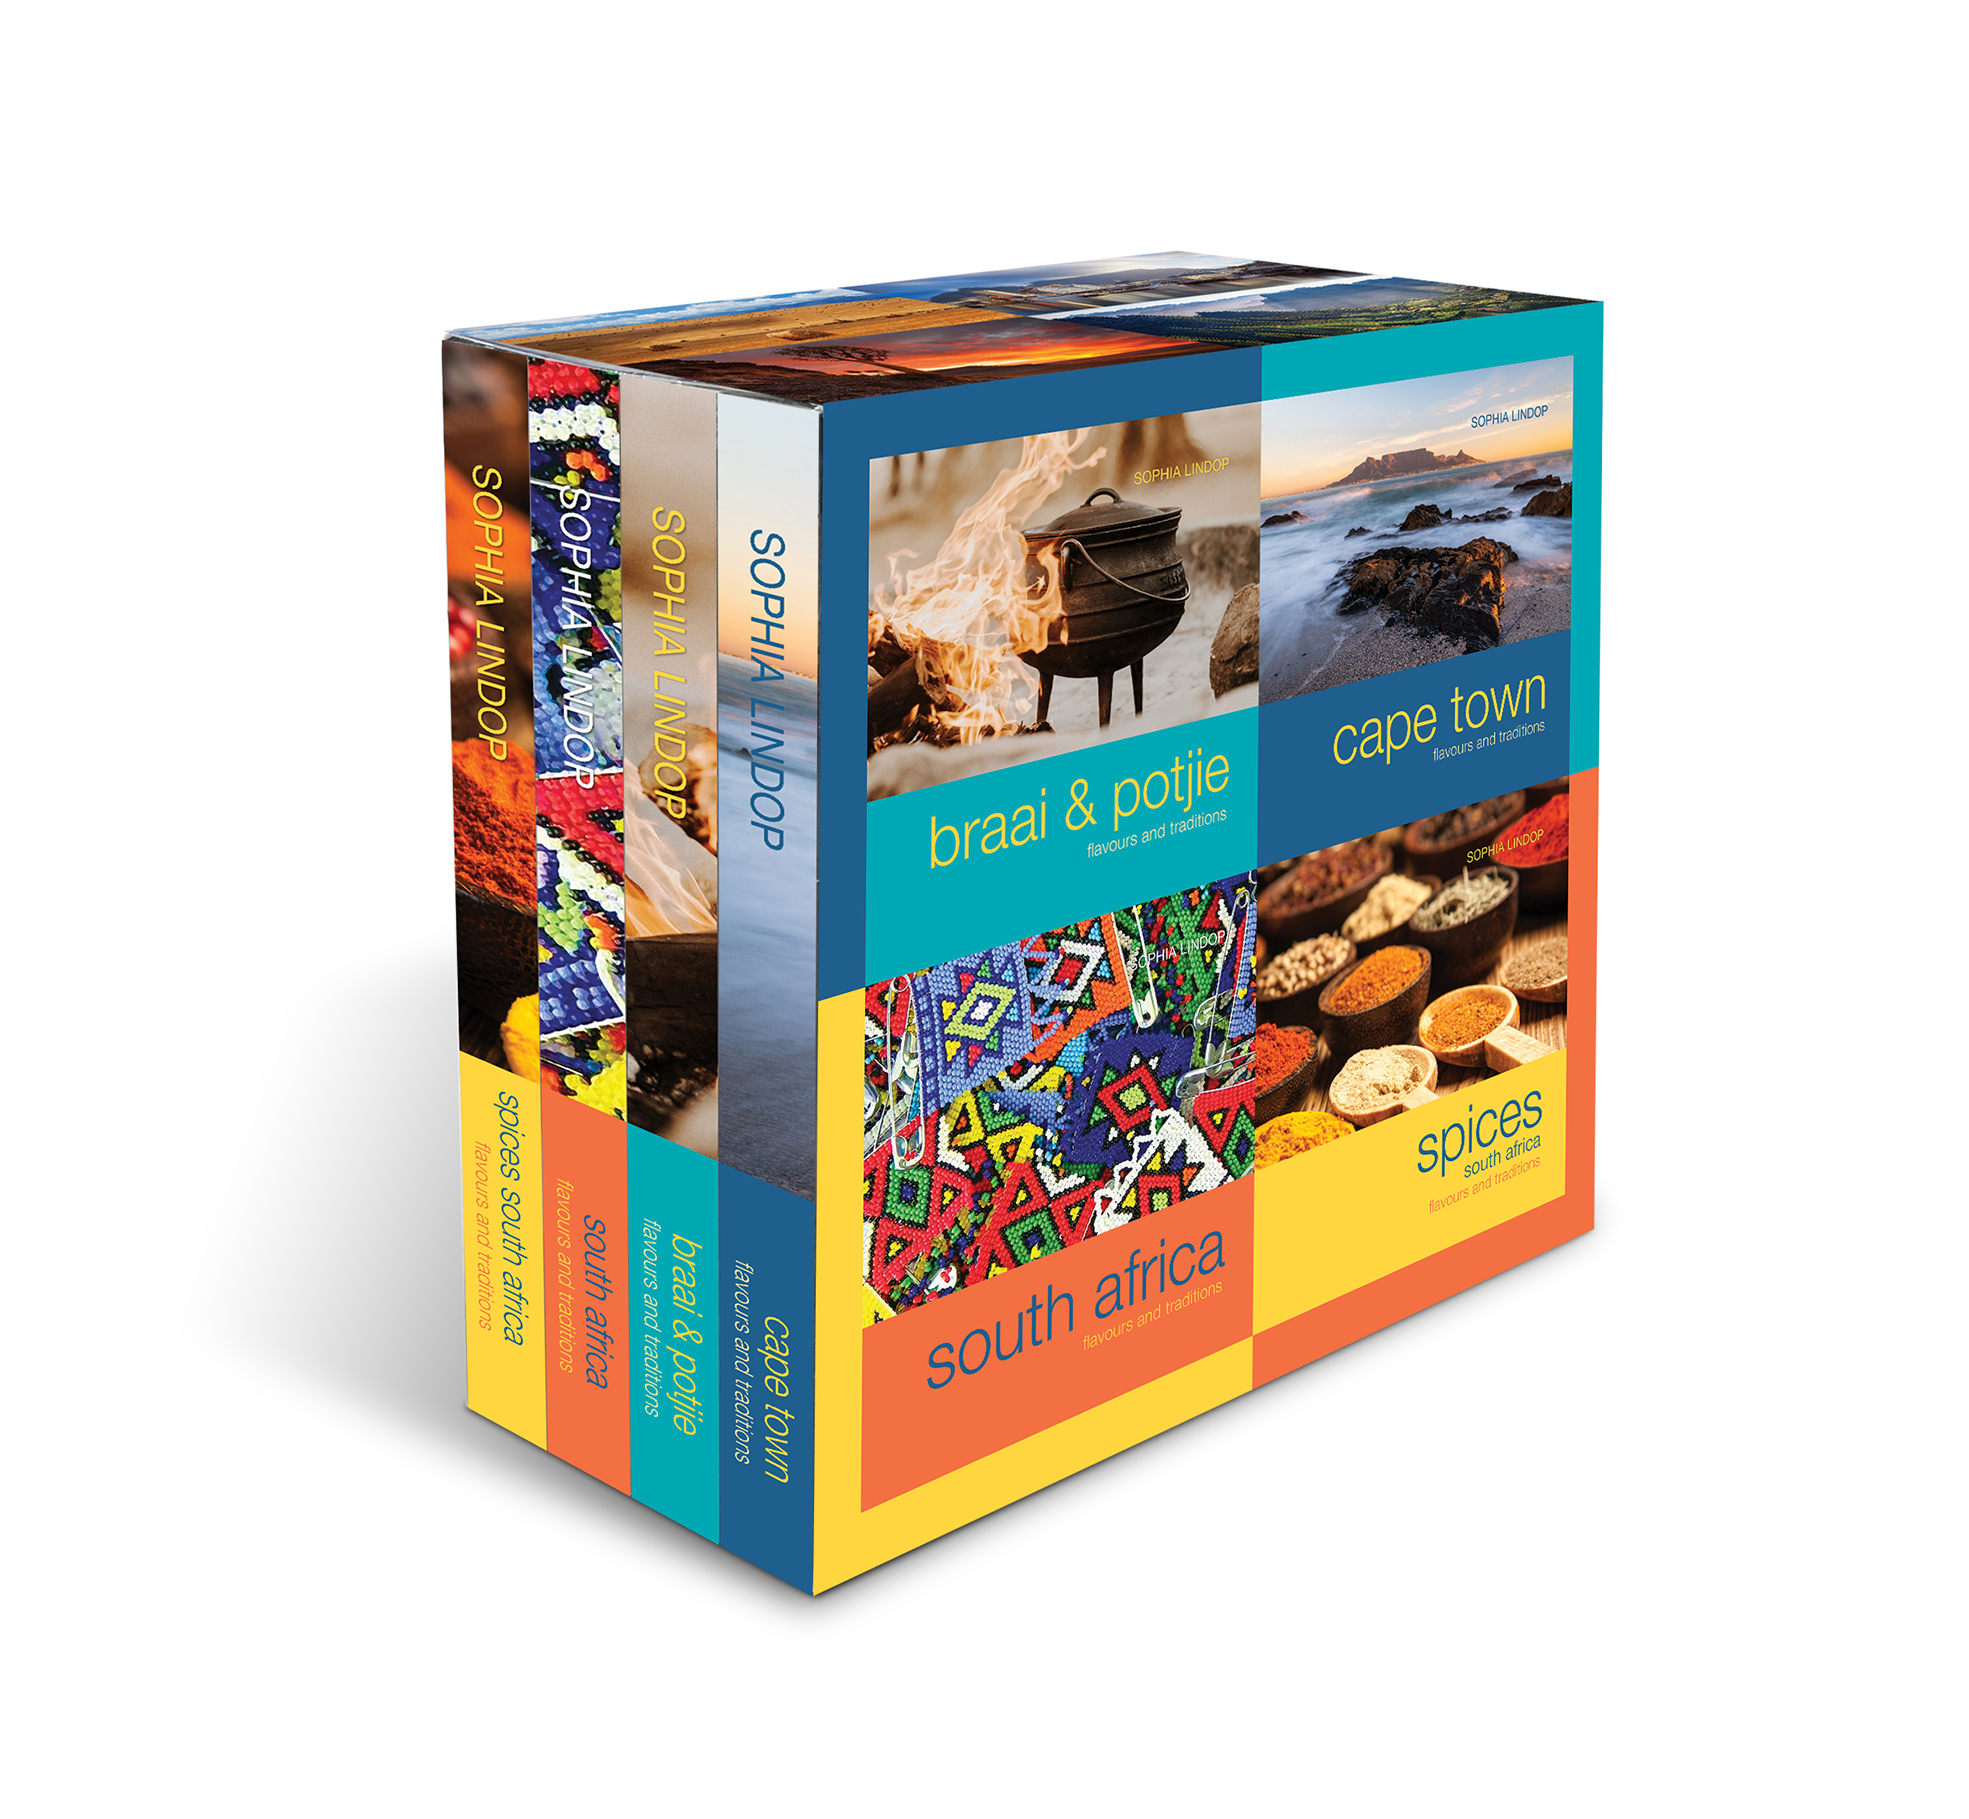 Flavours and Traditions Series 4 book Box Set